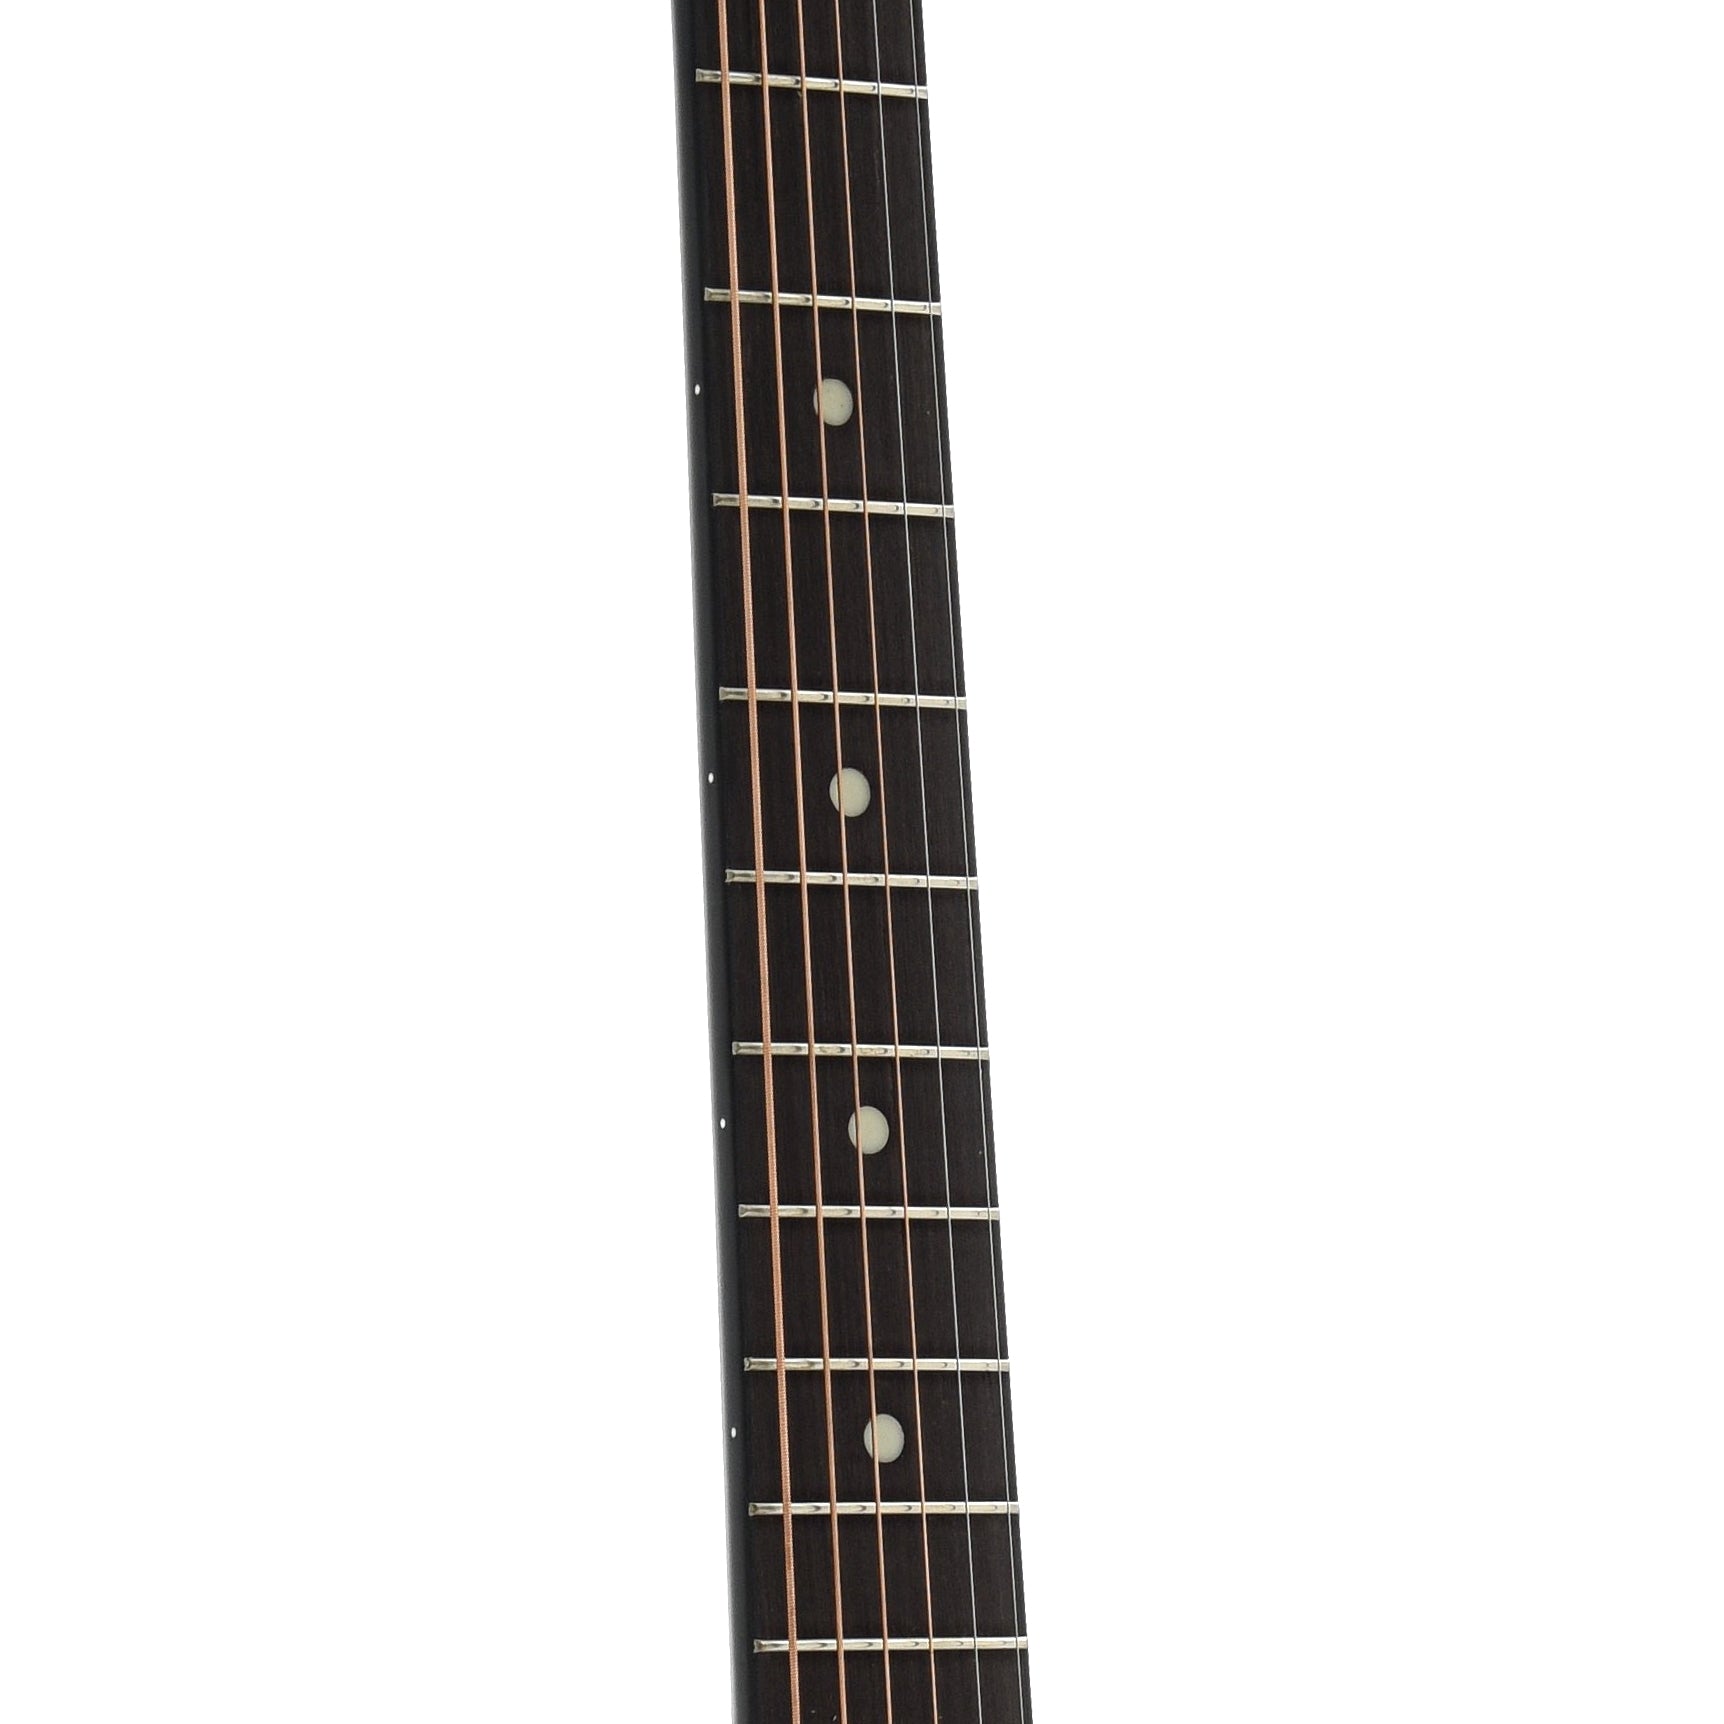 Fretboard of Recording King Dirty 30's Series 9 14-Fret 000 Acoustic Guitar